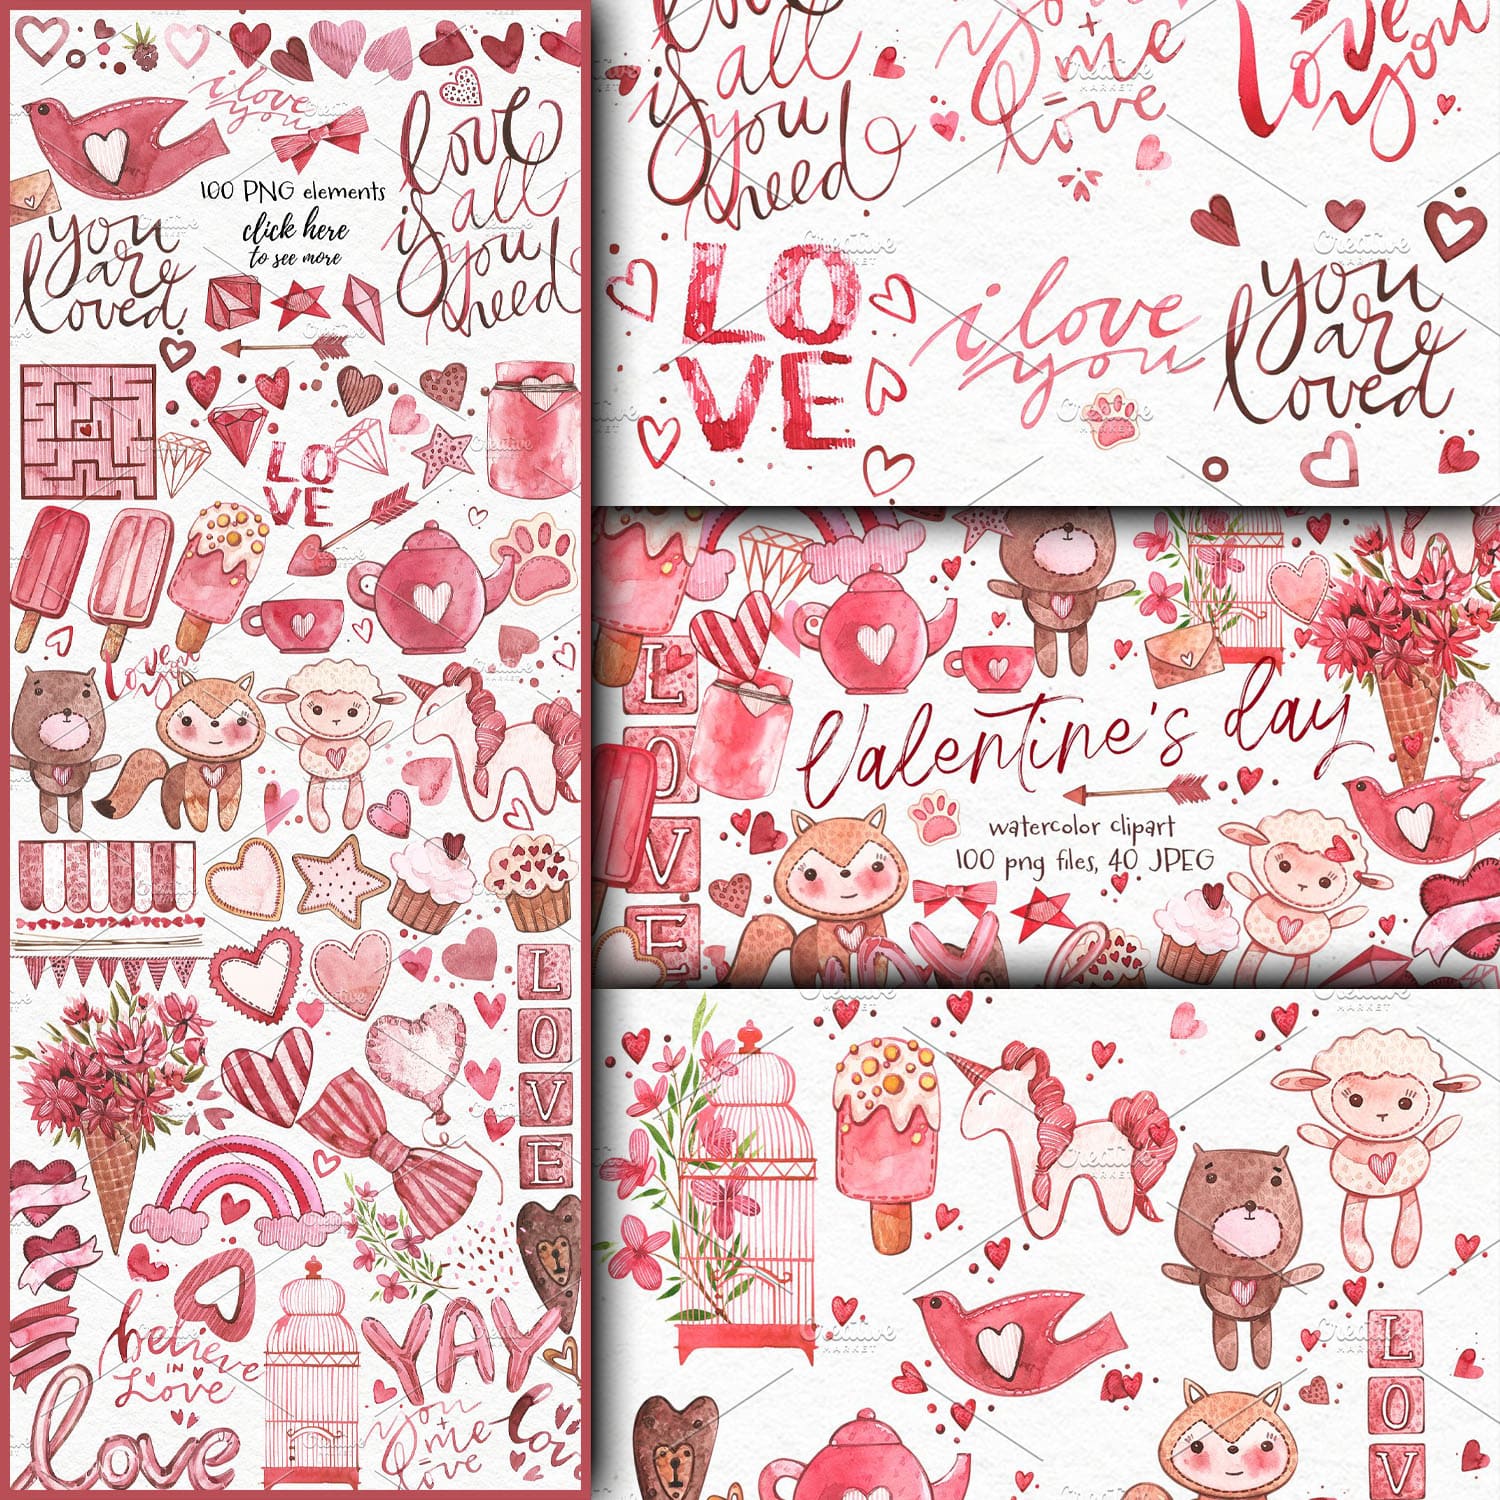 2202386 valentines day clipart 1500 1500 1 795